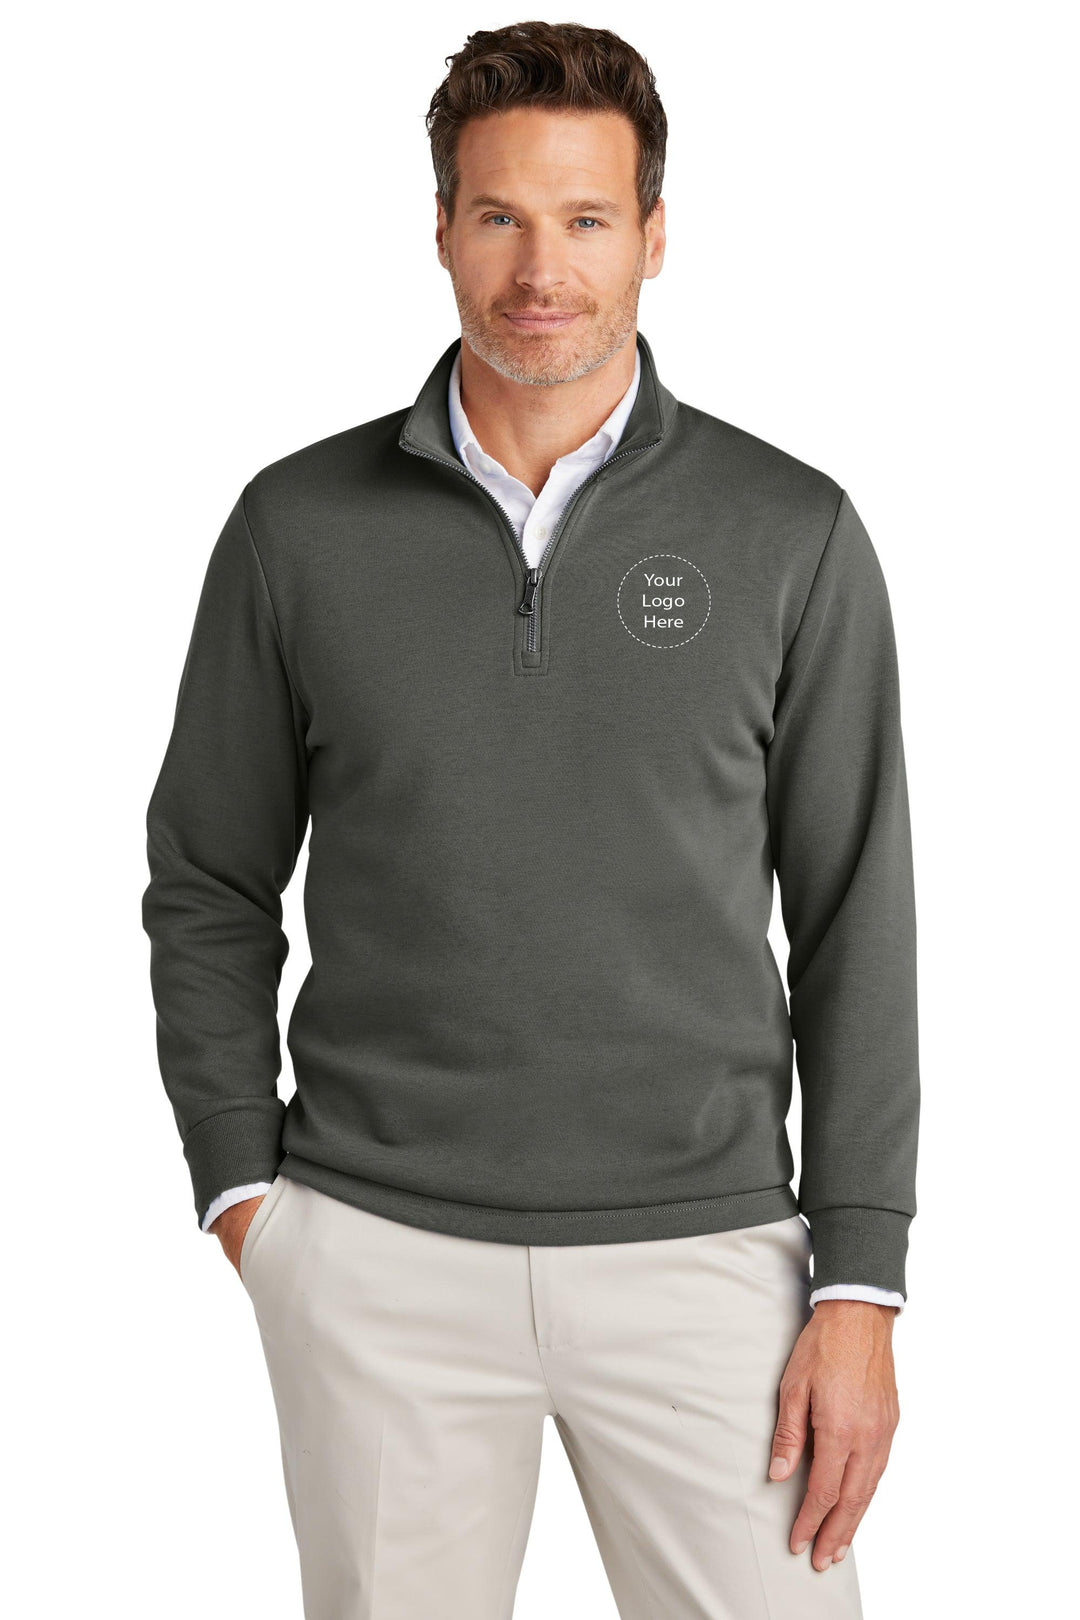 Keller Williams NEW KW-BB18206 Brooks Brothers® Double-Knit 1/4-Zip 